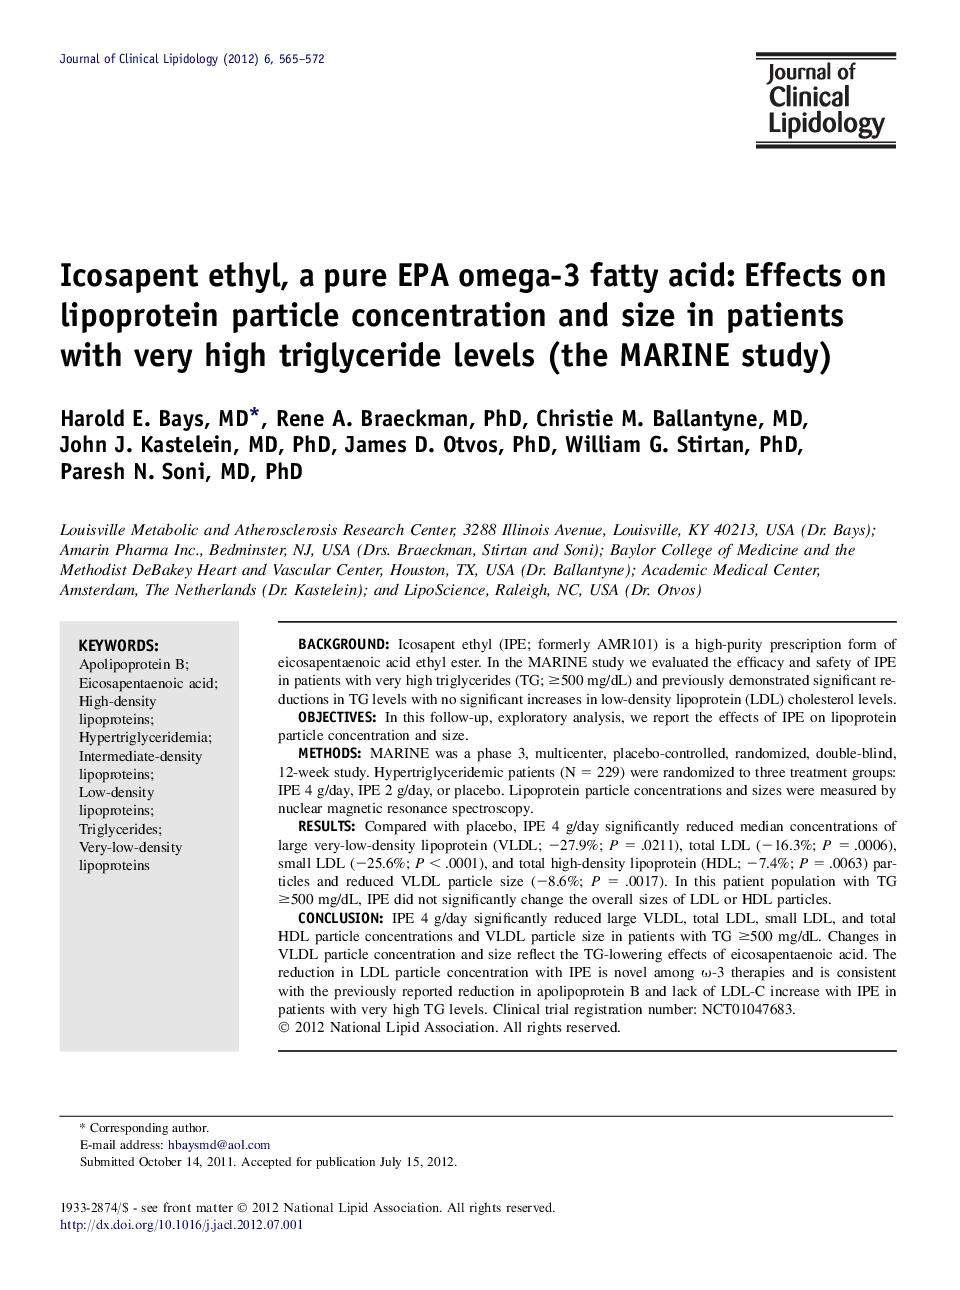 Icosapent ethyl, a pure EPA omega-3 fatty acid: Effects on lipoprotein particle concentration and size in patients with very high triglyceride levels (the MARINE study)